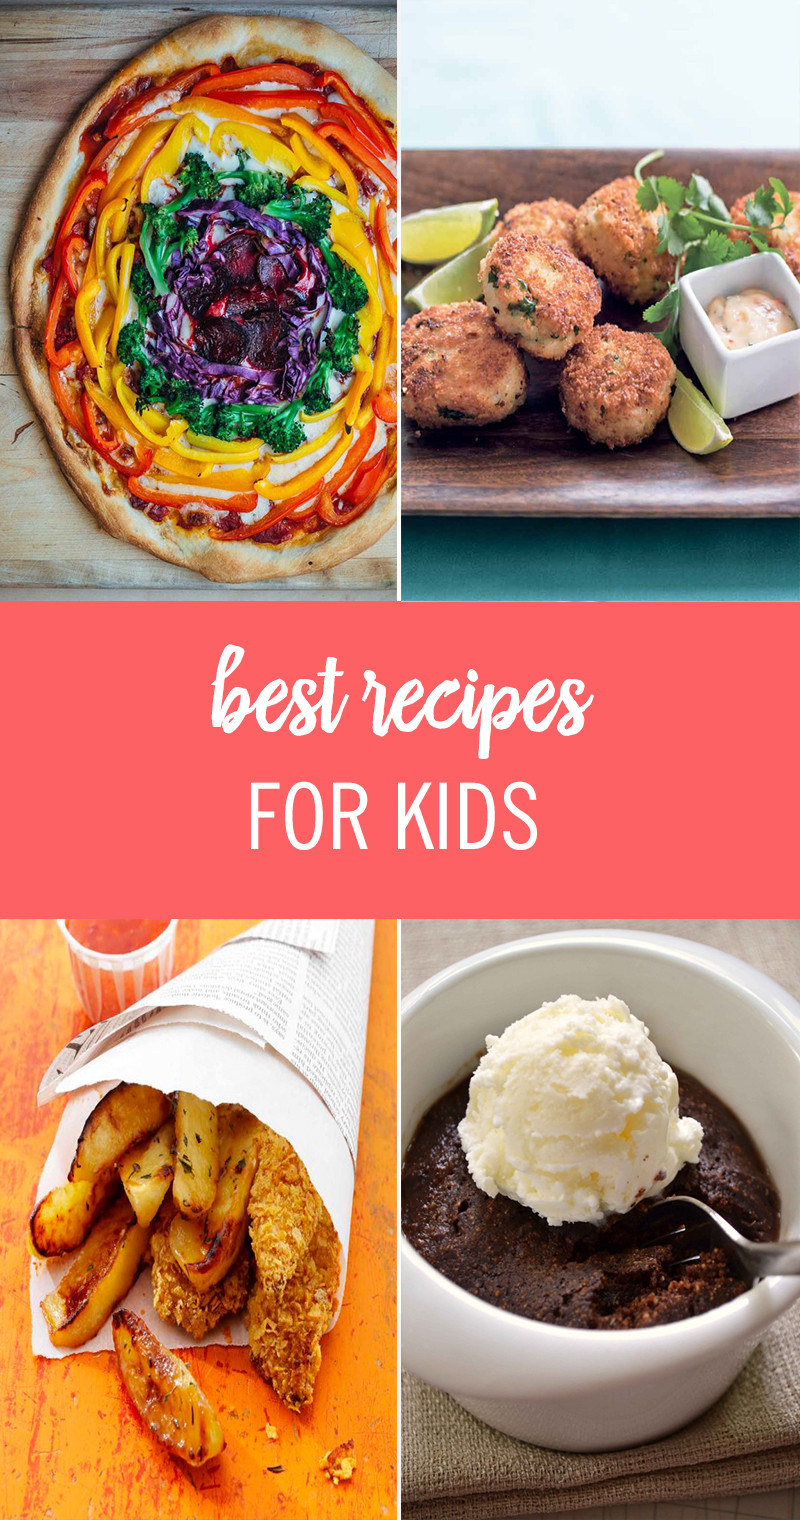 Healthy Family Dinners For Picky Eaters
 Cooking for Kids 50 Best Recipes for Kids and Picky Eaters